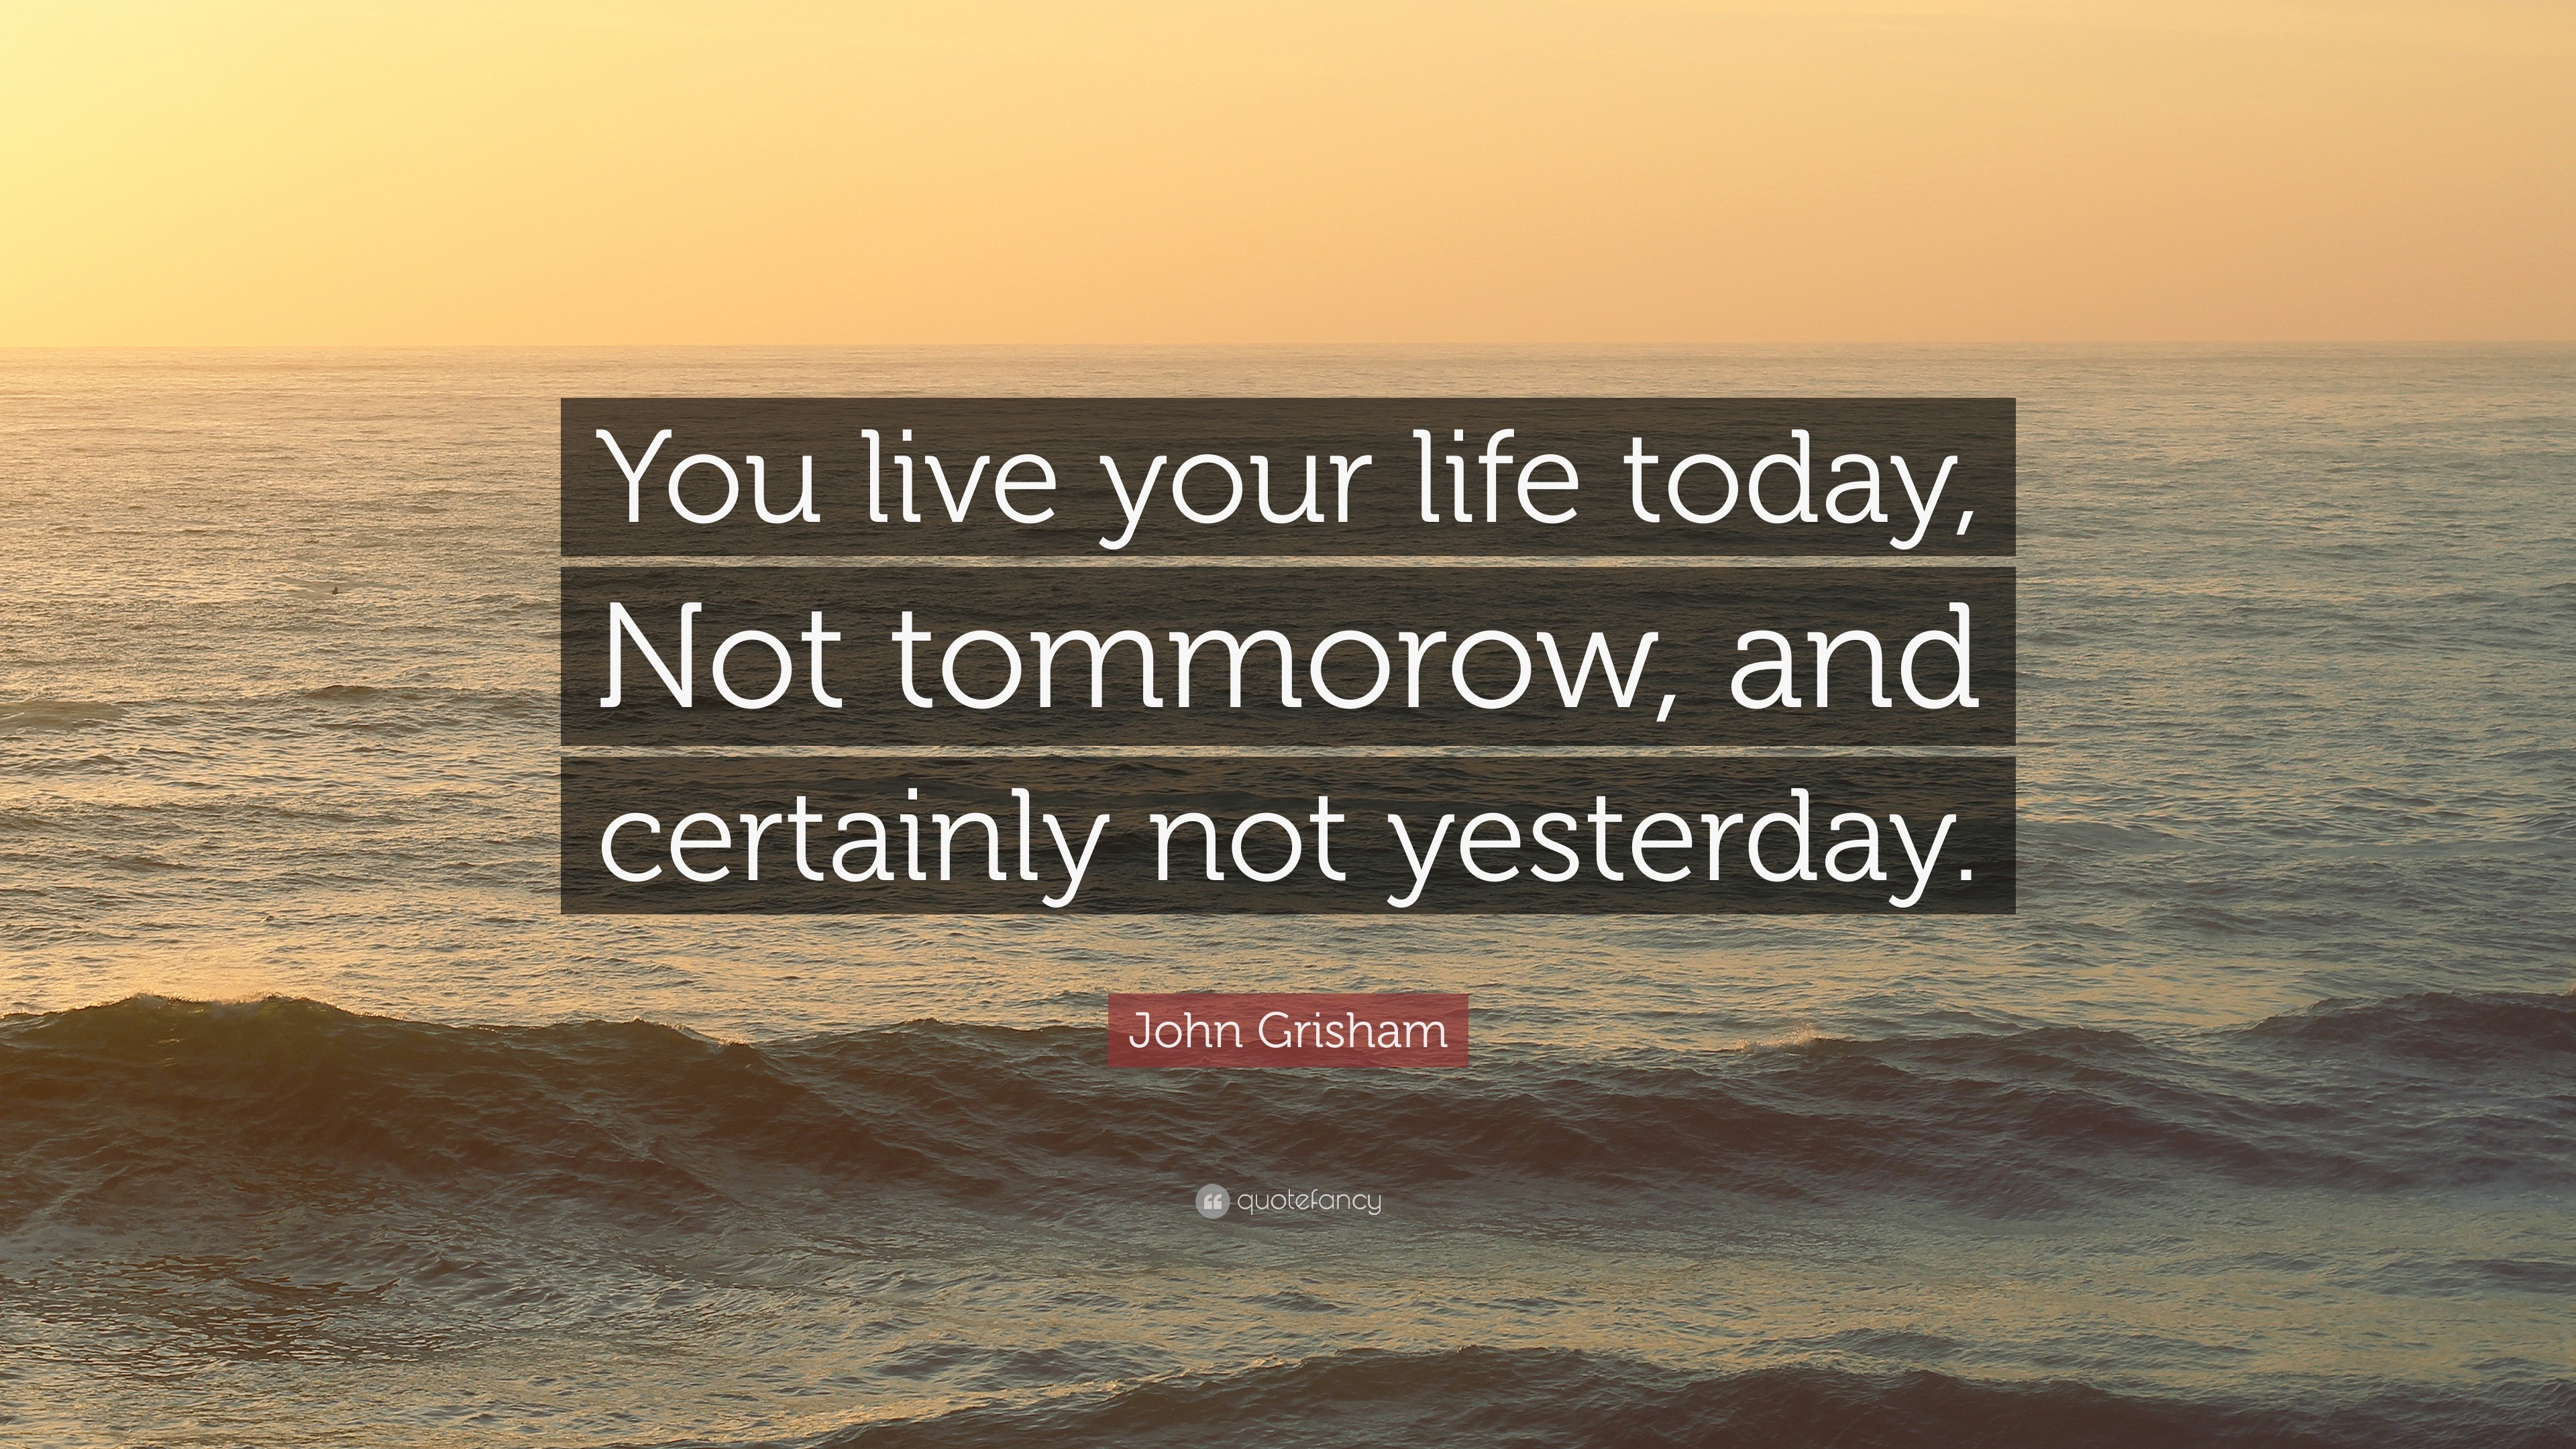 John Grisham Quote “You live your life today Not tommorow and certainly